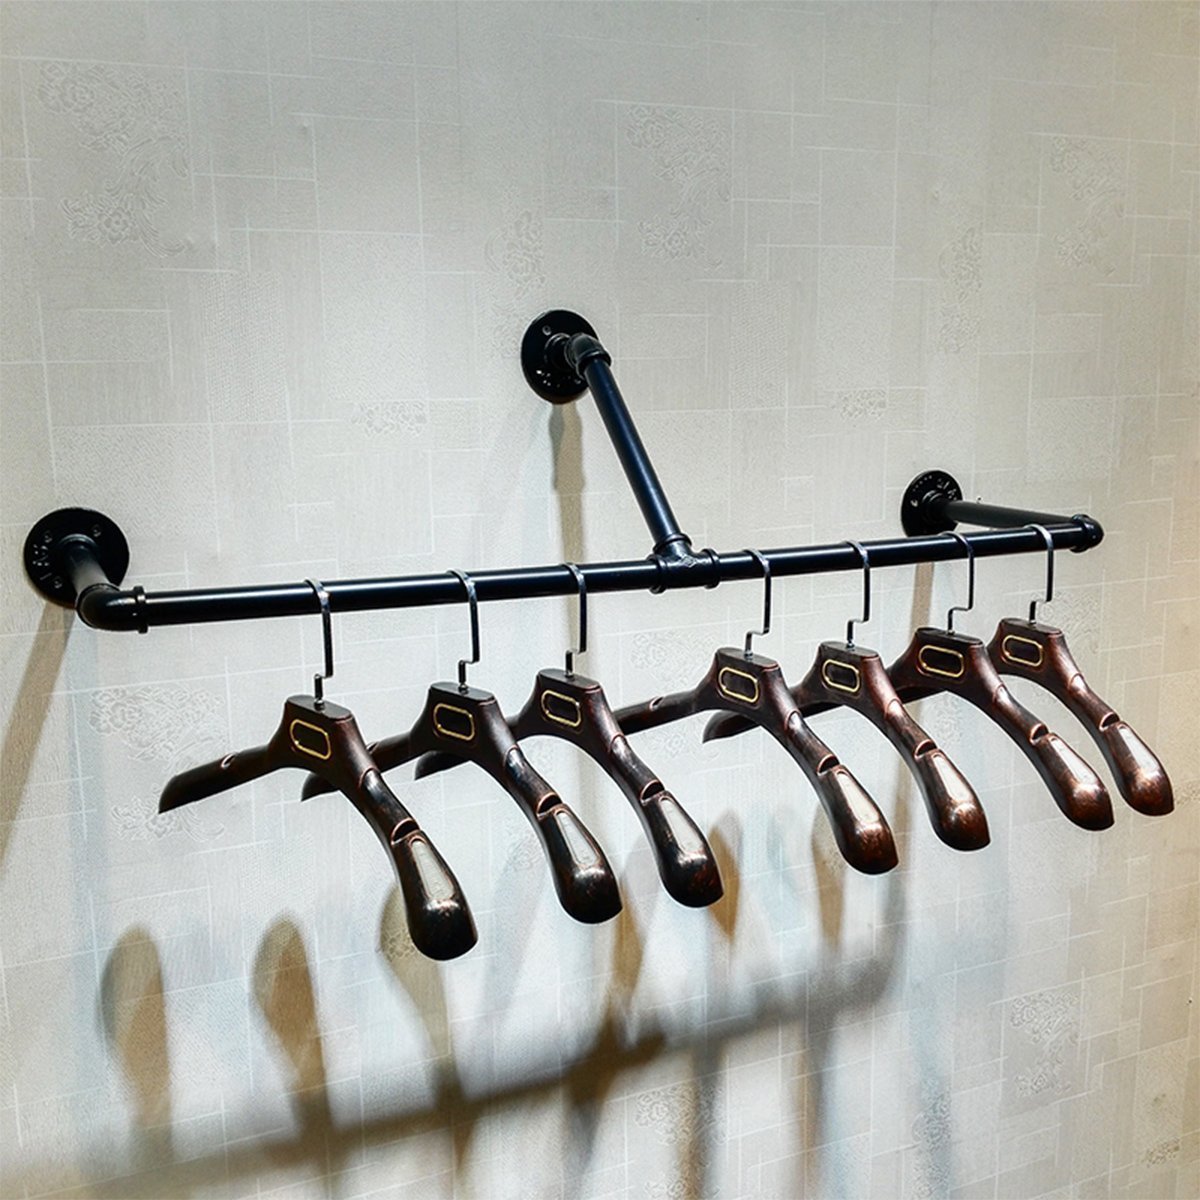 Storage warm van industrial pipe wall mounted clothes hanging shelves system metal clothing towel rack garment rack perfect for retail display closet organizationone pipe shelves 59 l